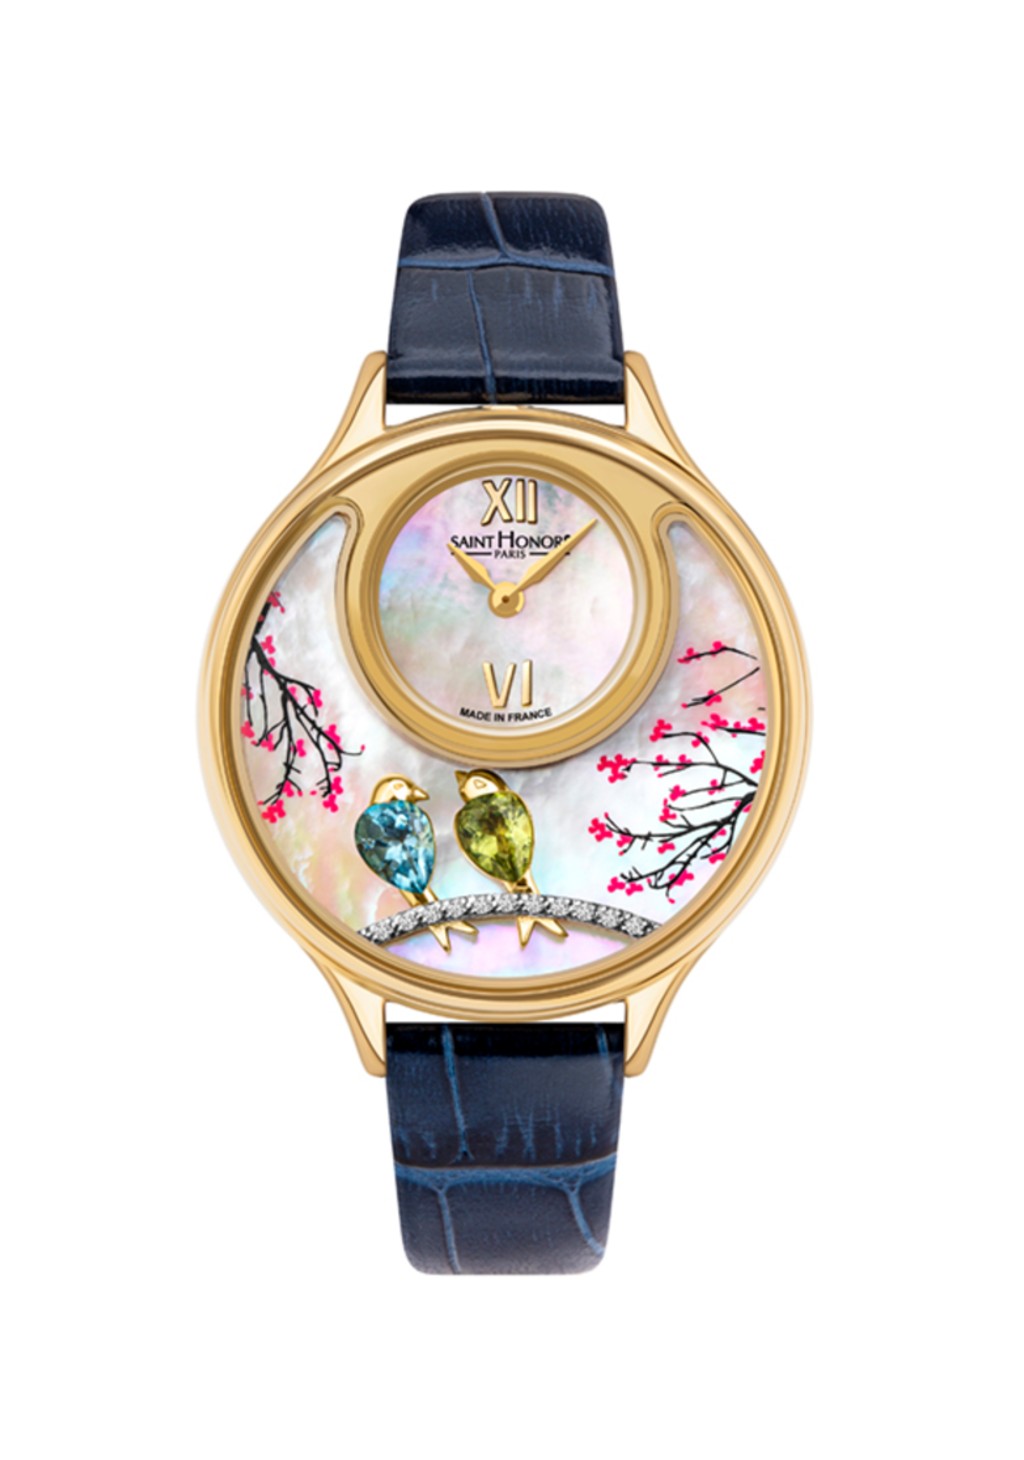 DAUPHINE Women's watch - ion plating gold case, WHT MOP & diamond effect dial, blue leather strap